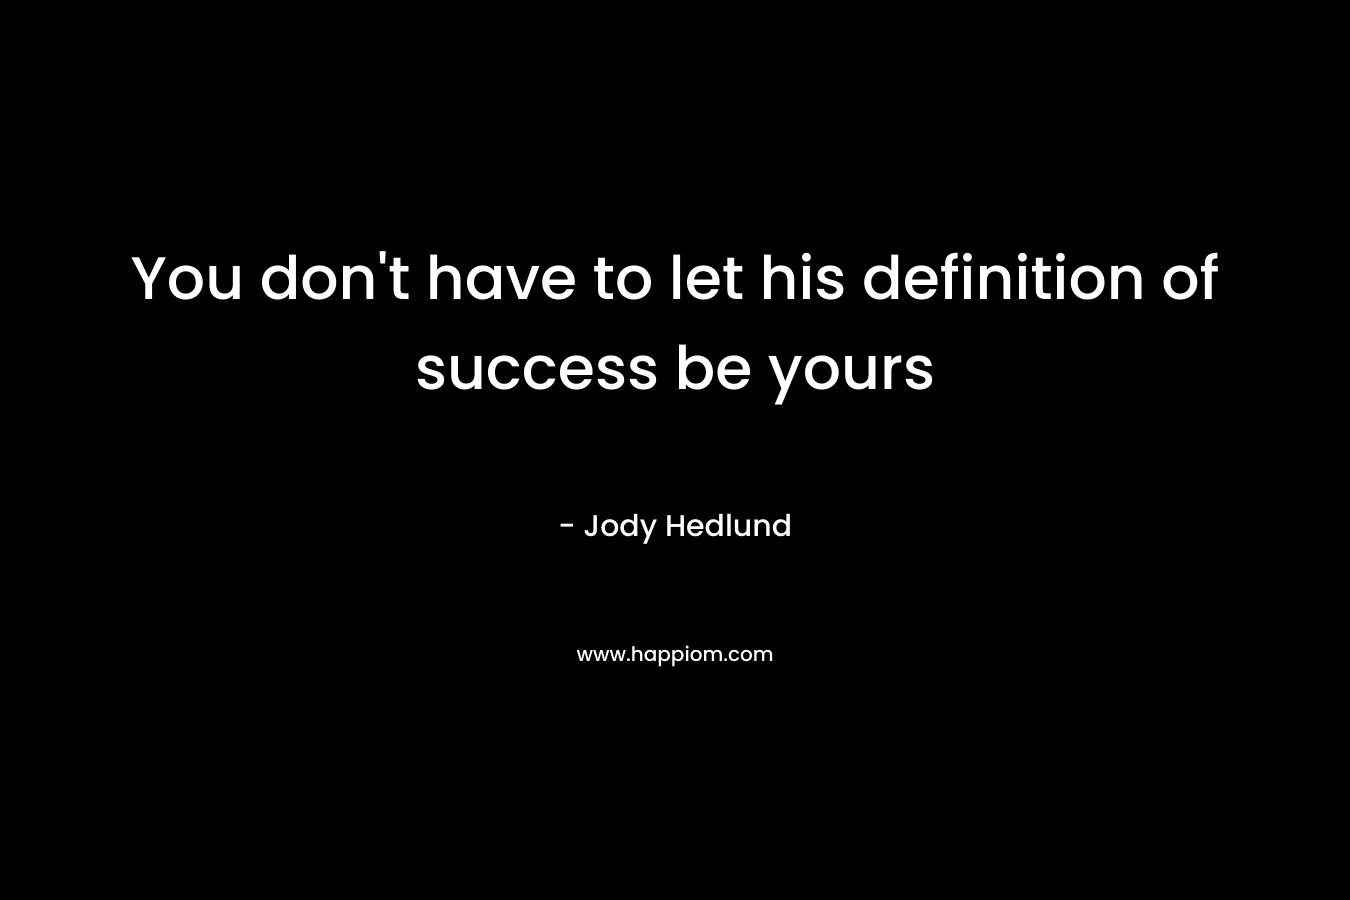 You don't have to let his definition of success be yours